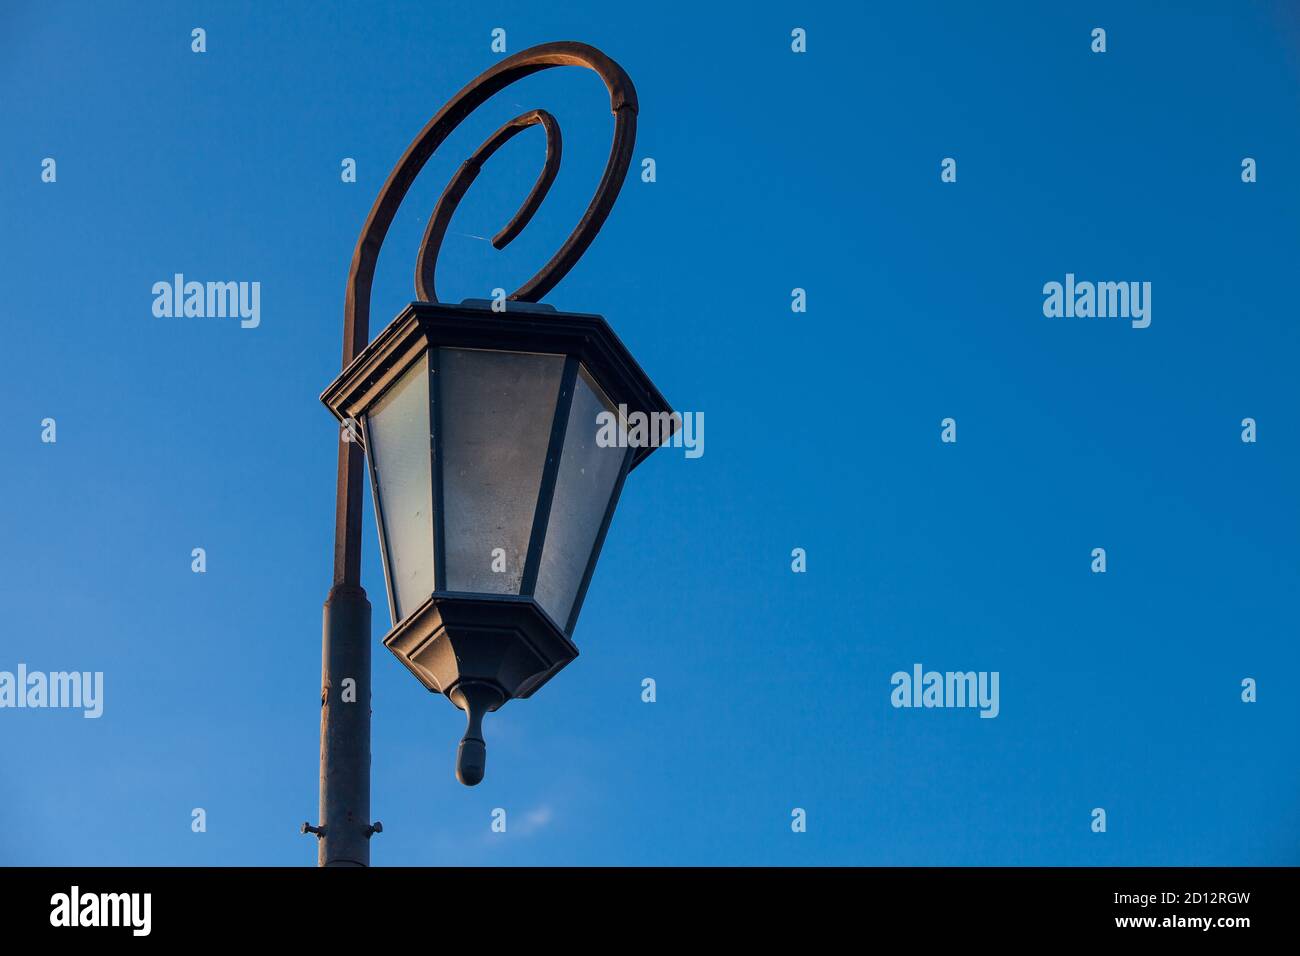 Low-angle view of antique style lampposts against a bright blue sky. Stock Photo